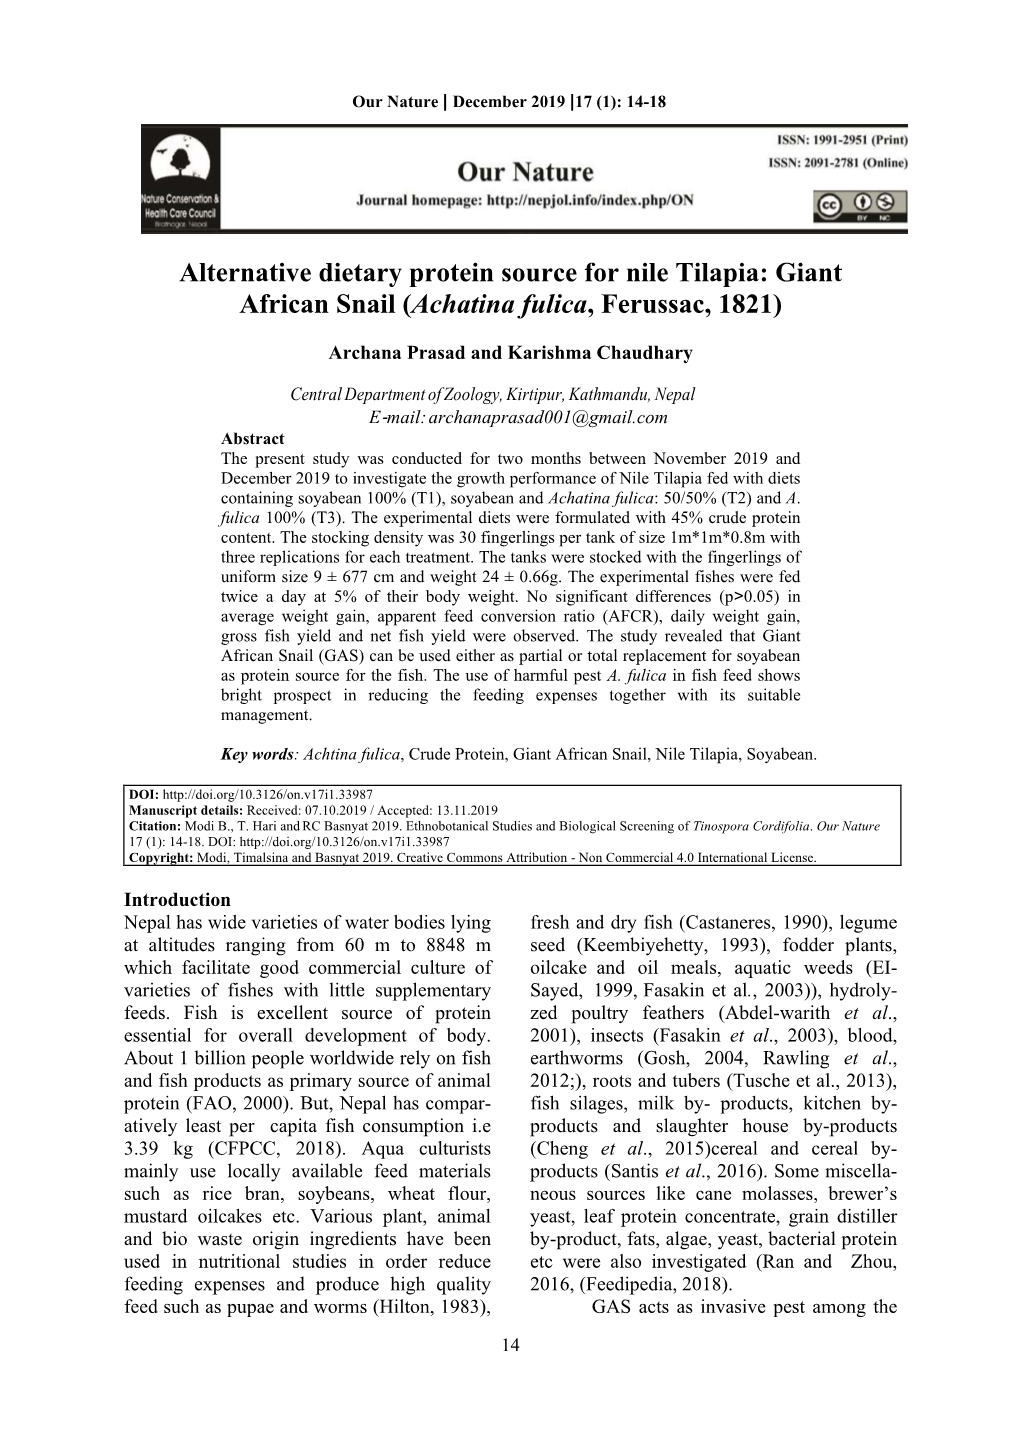 Alternative Dietary Protein Source for Nile Tilapia: Giant African Snail (Achatina Fulica, Ferussac, 1821)